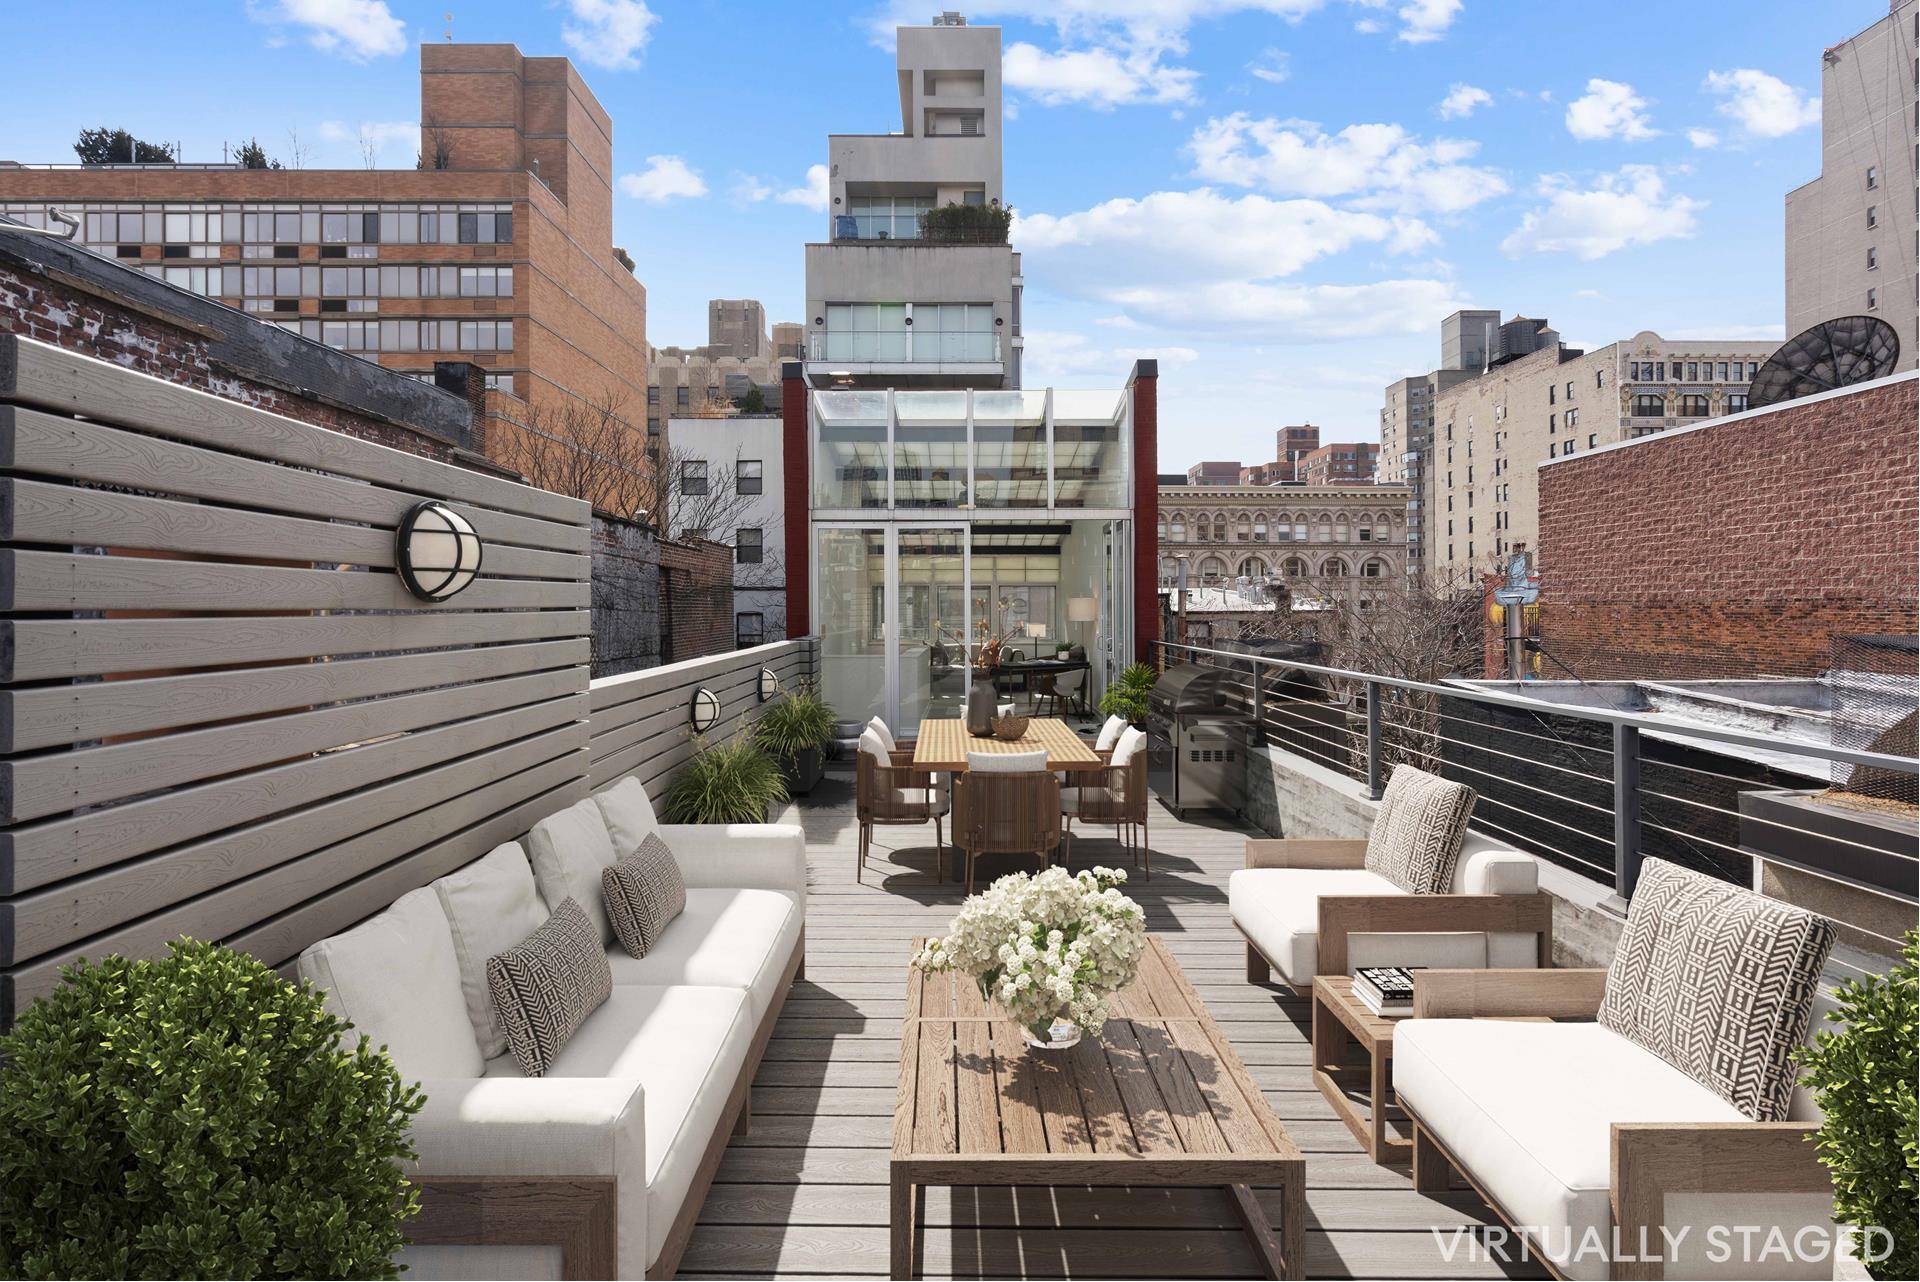 This rarely available townhouse condo offers four, large bedrooms over three floors and an additional, enclosed rooftop solarium, plus a large roof deck with views of the Empire State Building.